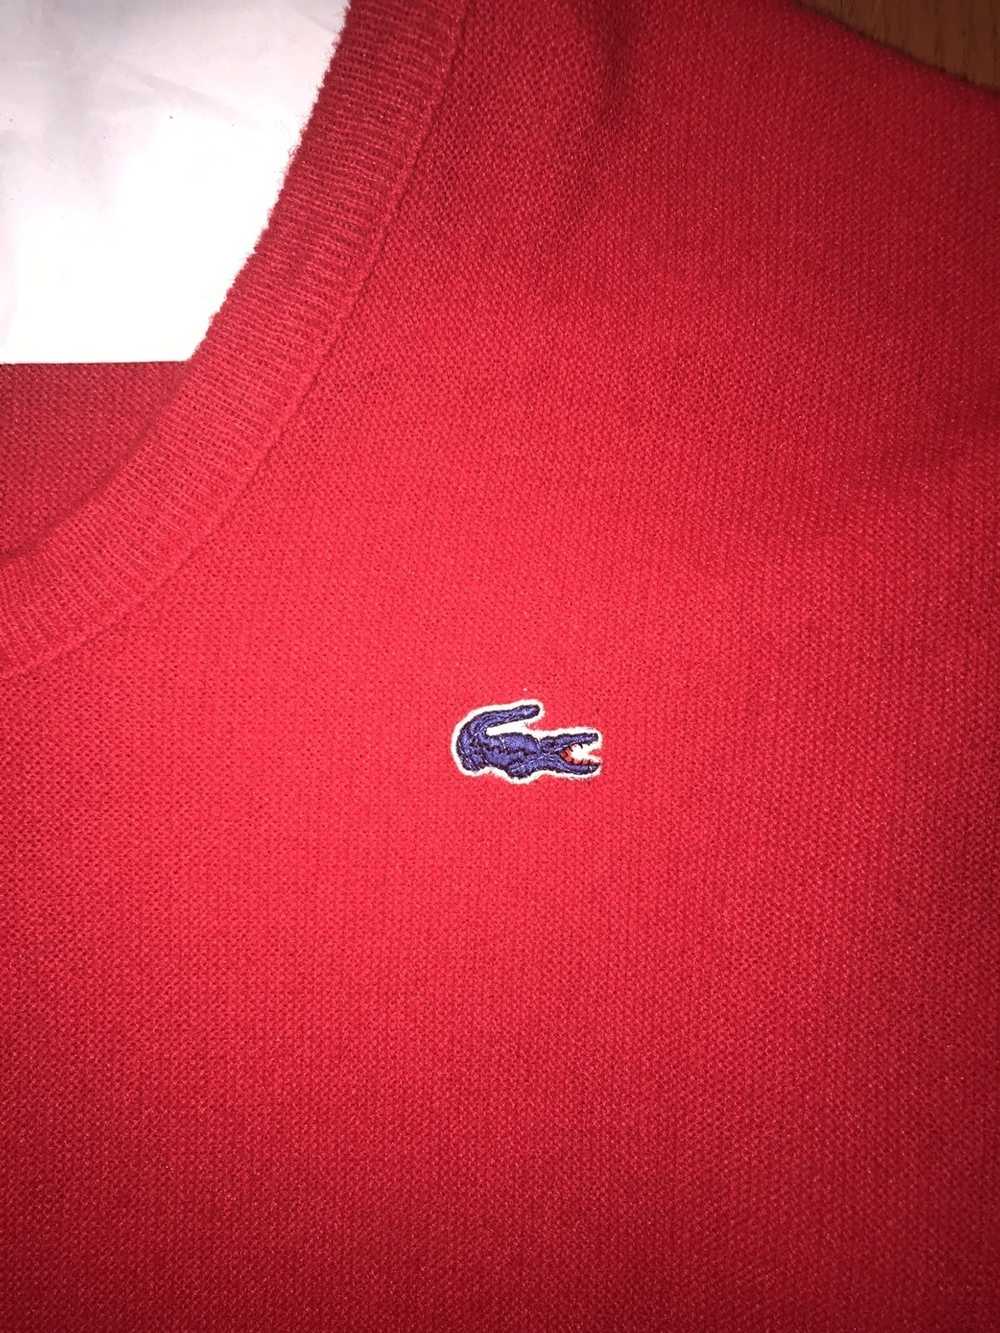 Lacoste Lacoste sweater - image 2